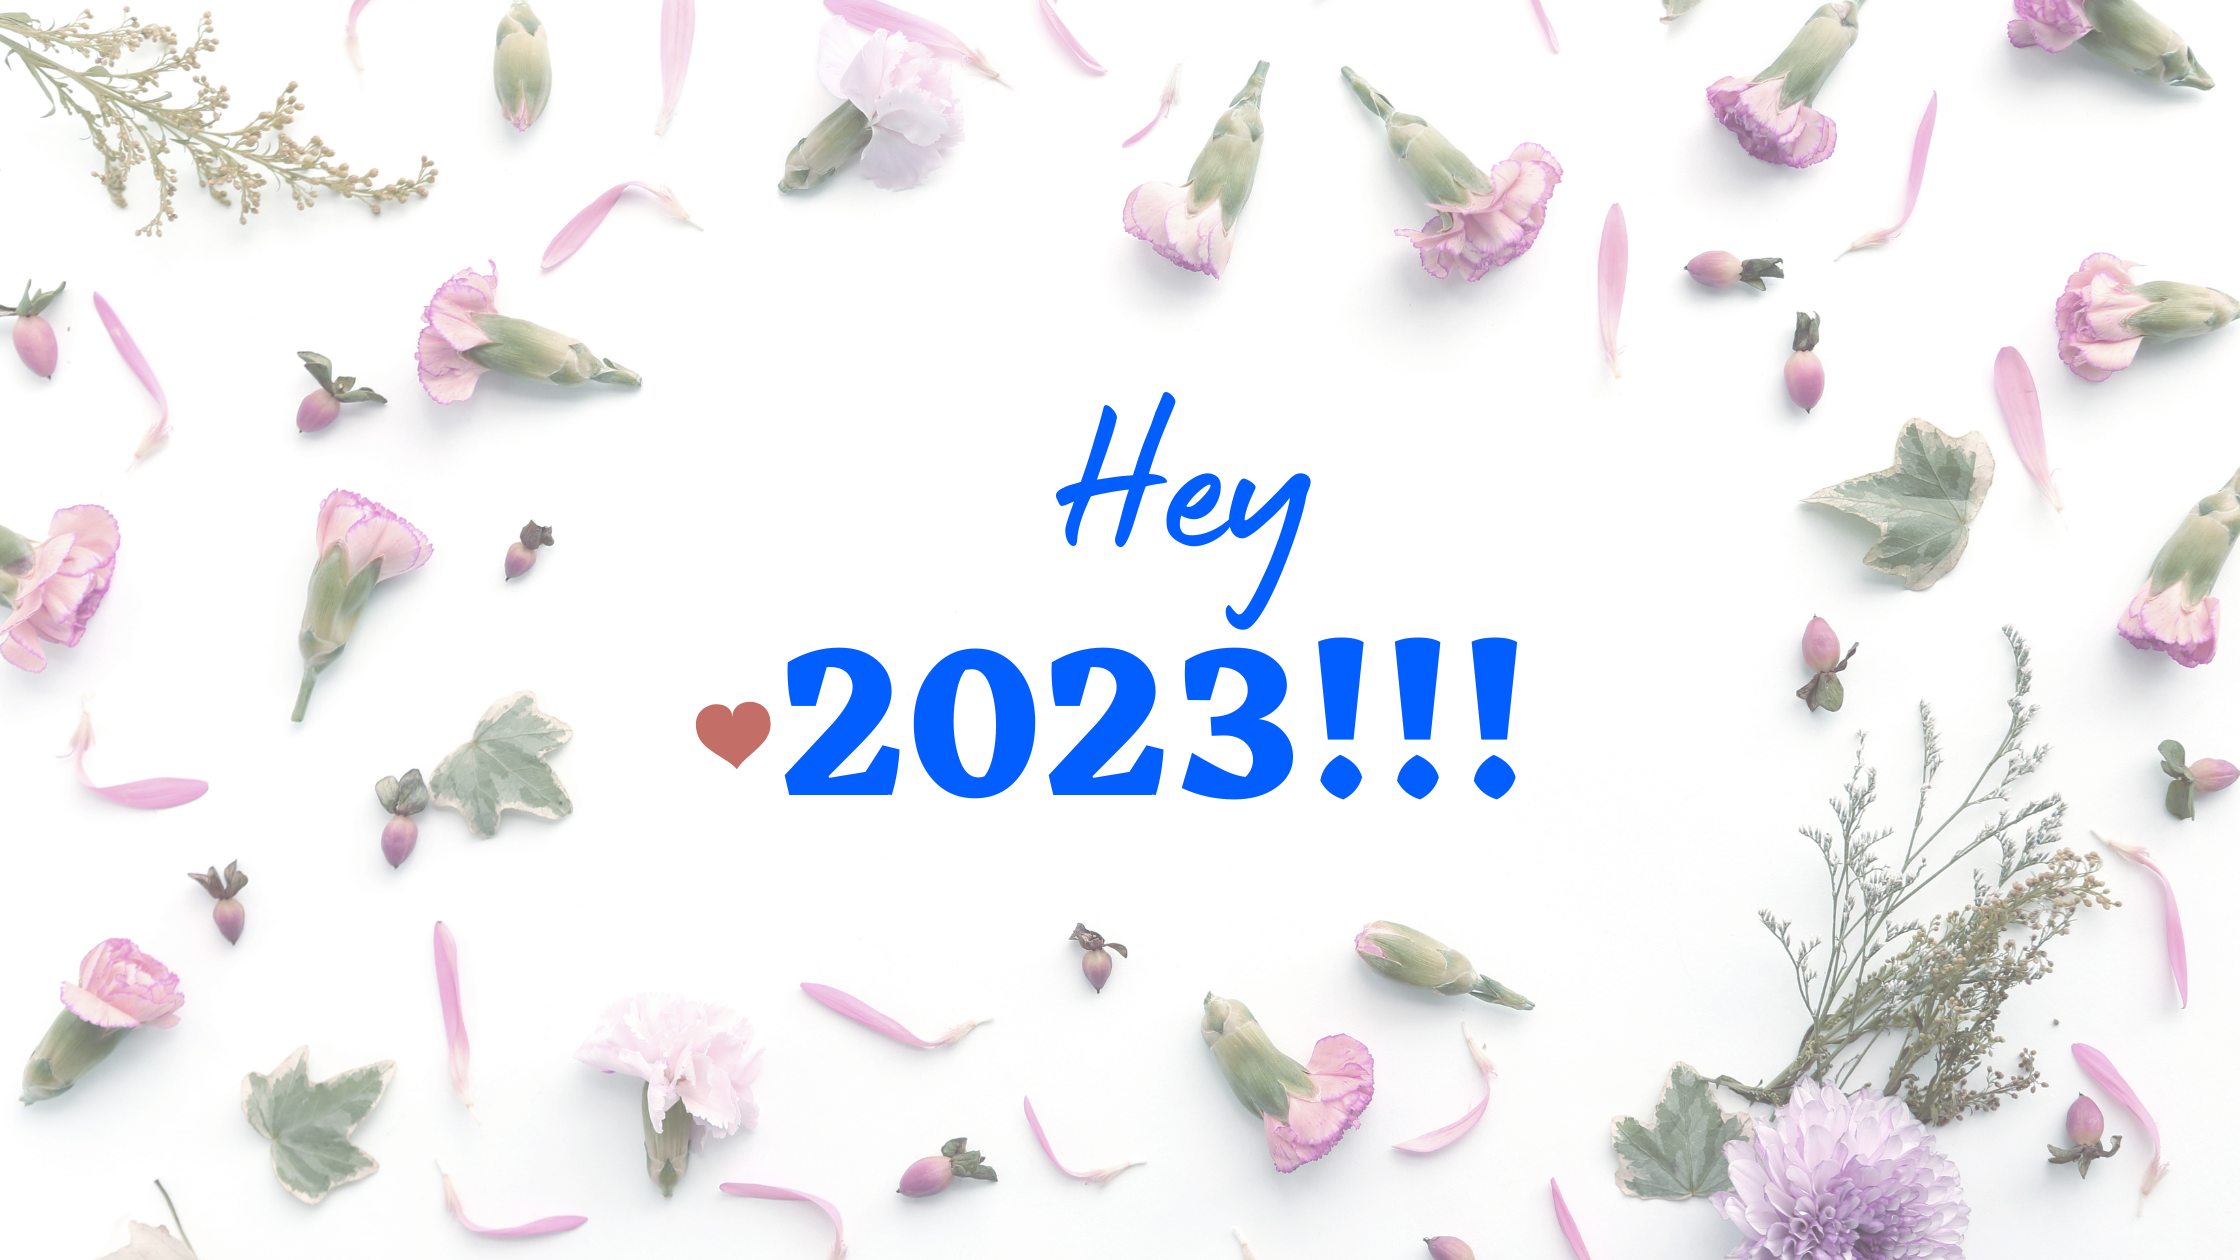 Happy New Year: Inspiring messages that would motivate you in 2023